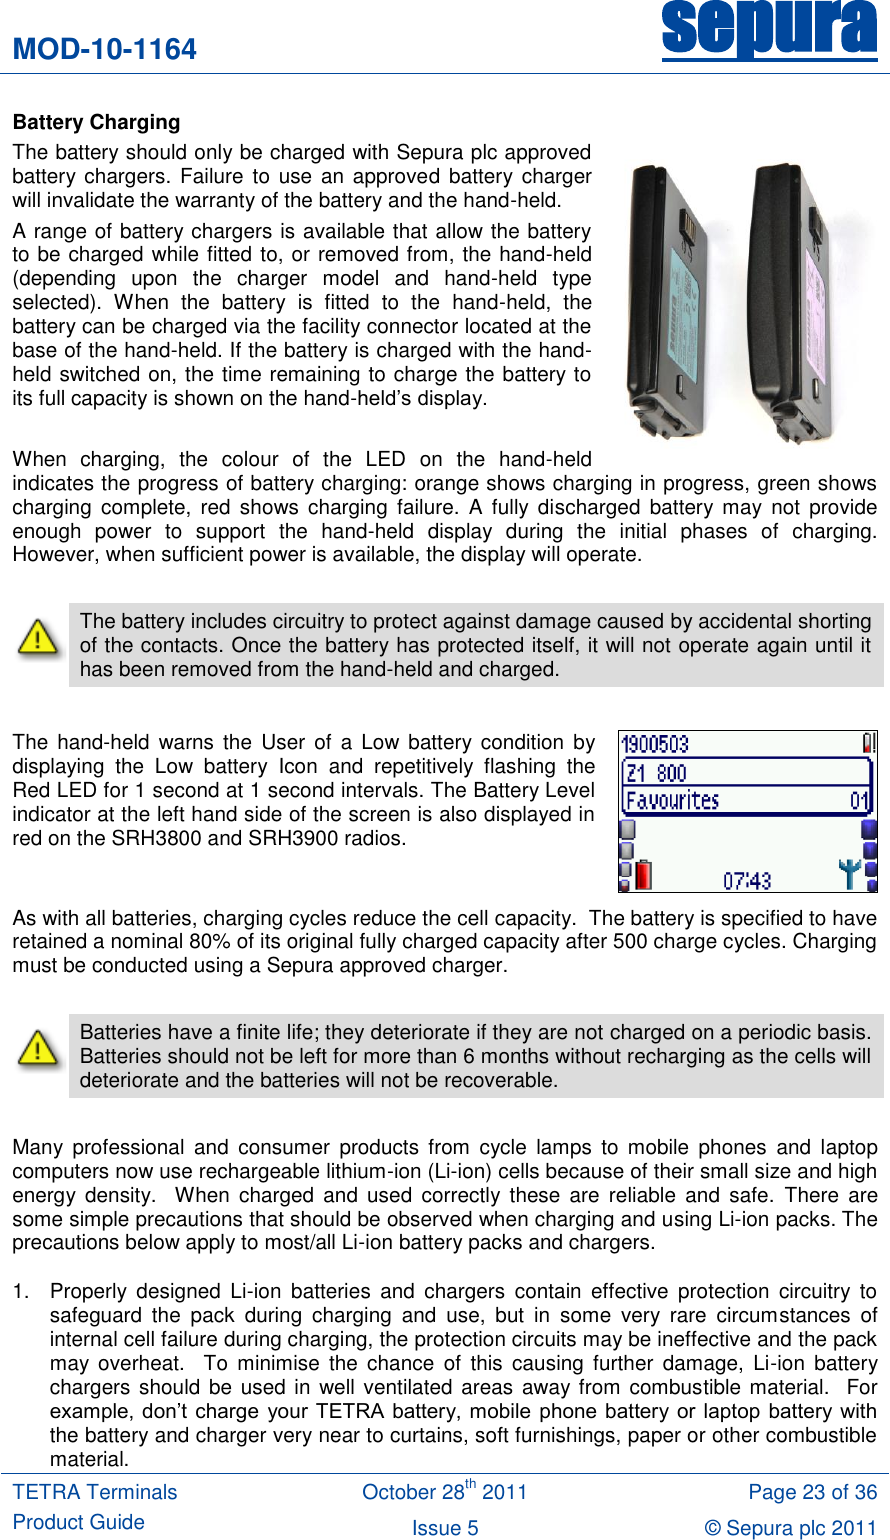 MOD-10-1164 sepura  TETRA Terminals Product Guide October 28th 2011 Page 23 of 36 Issue 5 © Sepura plc 2011   Battery Charging The battery should only be charged with Sepura plc approved battery chargers. Failure  to use  an  approved  battery charger will invalidate the warranty of the battery and the hand-held. A range of battery chargers is available that allow the battery to be charged while fitted to, or removed from, the hand-held (depending  upon  the  charger  model  and  hand-held  type selected).  When  the  battery  is  fitted  to  the  hand-held,  the battery can be charged via the facility connector located at the base of the hand-held. If the battery is charged with the hand-held switched on, the time remaining to charge the battery to its full capacity is shown on the hand-held‟s display.  When  charging,  the  colour  of  the  LED  on  the  hand-held indicates the progress of battery charging: orange shows charging in progress, green shows charging  complete,  red  shows charging  failure.  A  fully  discharged  battery may  not  provide enough  power  to  support  the  hand-held  display  during  the  initial  phases  of  charging. However, when sufficient power is available, the display will operate.   The battery includes circuitry to protect against damage caused by accidental shorting of the contacts. Once the battery has protected itself, it will not operate again until it has been removed from the hand-held and charged.  The  hand-held  warns  the User  of  a  Low battery  condition by displaying  the  Low  battery  Icon  and  repetitively  flashing  the Red LED for 1 second at 1 second intervals. The Battery Level indicator at the left hand side of the screen is also displayed in red on the SRH3800 and SRH3900 radios.  As with all batteries, charging cycles reduce the cell capacity.  The battery is specified to have retained a nominal 80% of its original fully charged capacity after 500 charge cycles. Charging must be conducted using a Sepura approved charger.   Batteries have a finite life; they deteriorate if they are not charged on a periodic basis.  Batteries should not be left for more than 6 months without recharging as the cells will deteriorate and the batteries will not be recoverable.  Many  professional  and  consumer  products  from  cycle  lamps  to  mobile  phones  and  laptop computers now use rechargeable lithium-ion (Li-ion) cells because of their small size and high energy  density.    When  charged  and  used  correctly these  are  reliable  and safe.  There  are some simple precautions that should be observed when charging and using Li-ion packs. The precautions below apply to most/all Li-ion battery packs and chargers. 1.  Properly  designed  Li-ion  batteries  and  chargers  contain  effective  protection  circuitry  to safeguard  the  pack  during  charging  and  use,  but  in  some  very  rare  circumstances  of internal cell failure during charging, the protection circuits may be ineffective and the pack may  overheat.    To  minimise  the  chance  of  this  causing  further  damage,  Li-ion  battery chargers should be used in well ventilated areas away from combustible material.  For example,  don‟t  charge  your  TETRA battery, mobile  phone  battery or  laptop battery with the battery and charger very near to curtains, soft furnishings, paper or other combustible material. 